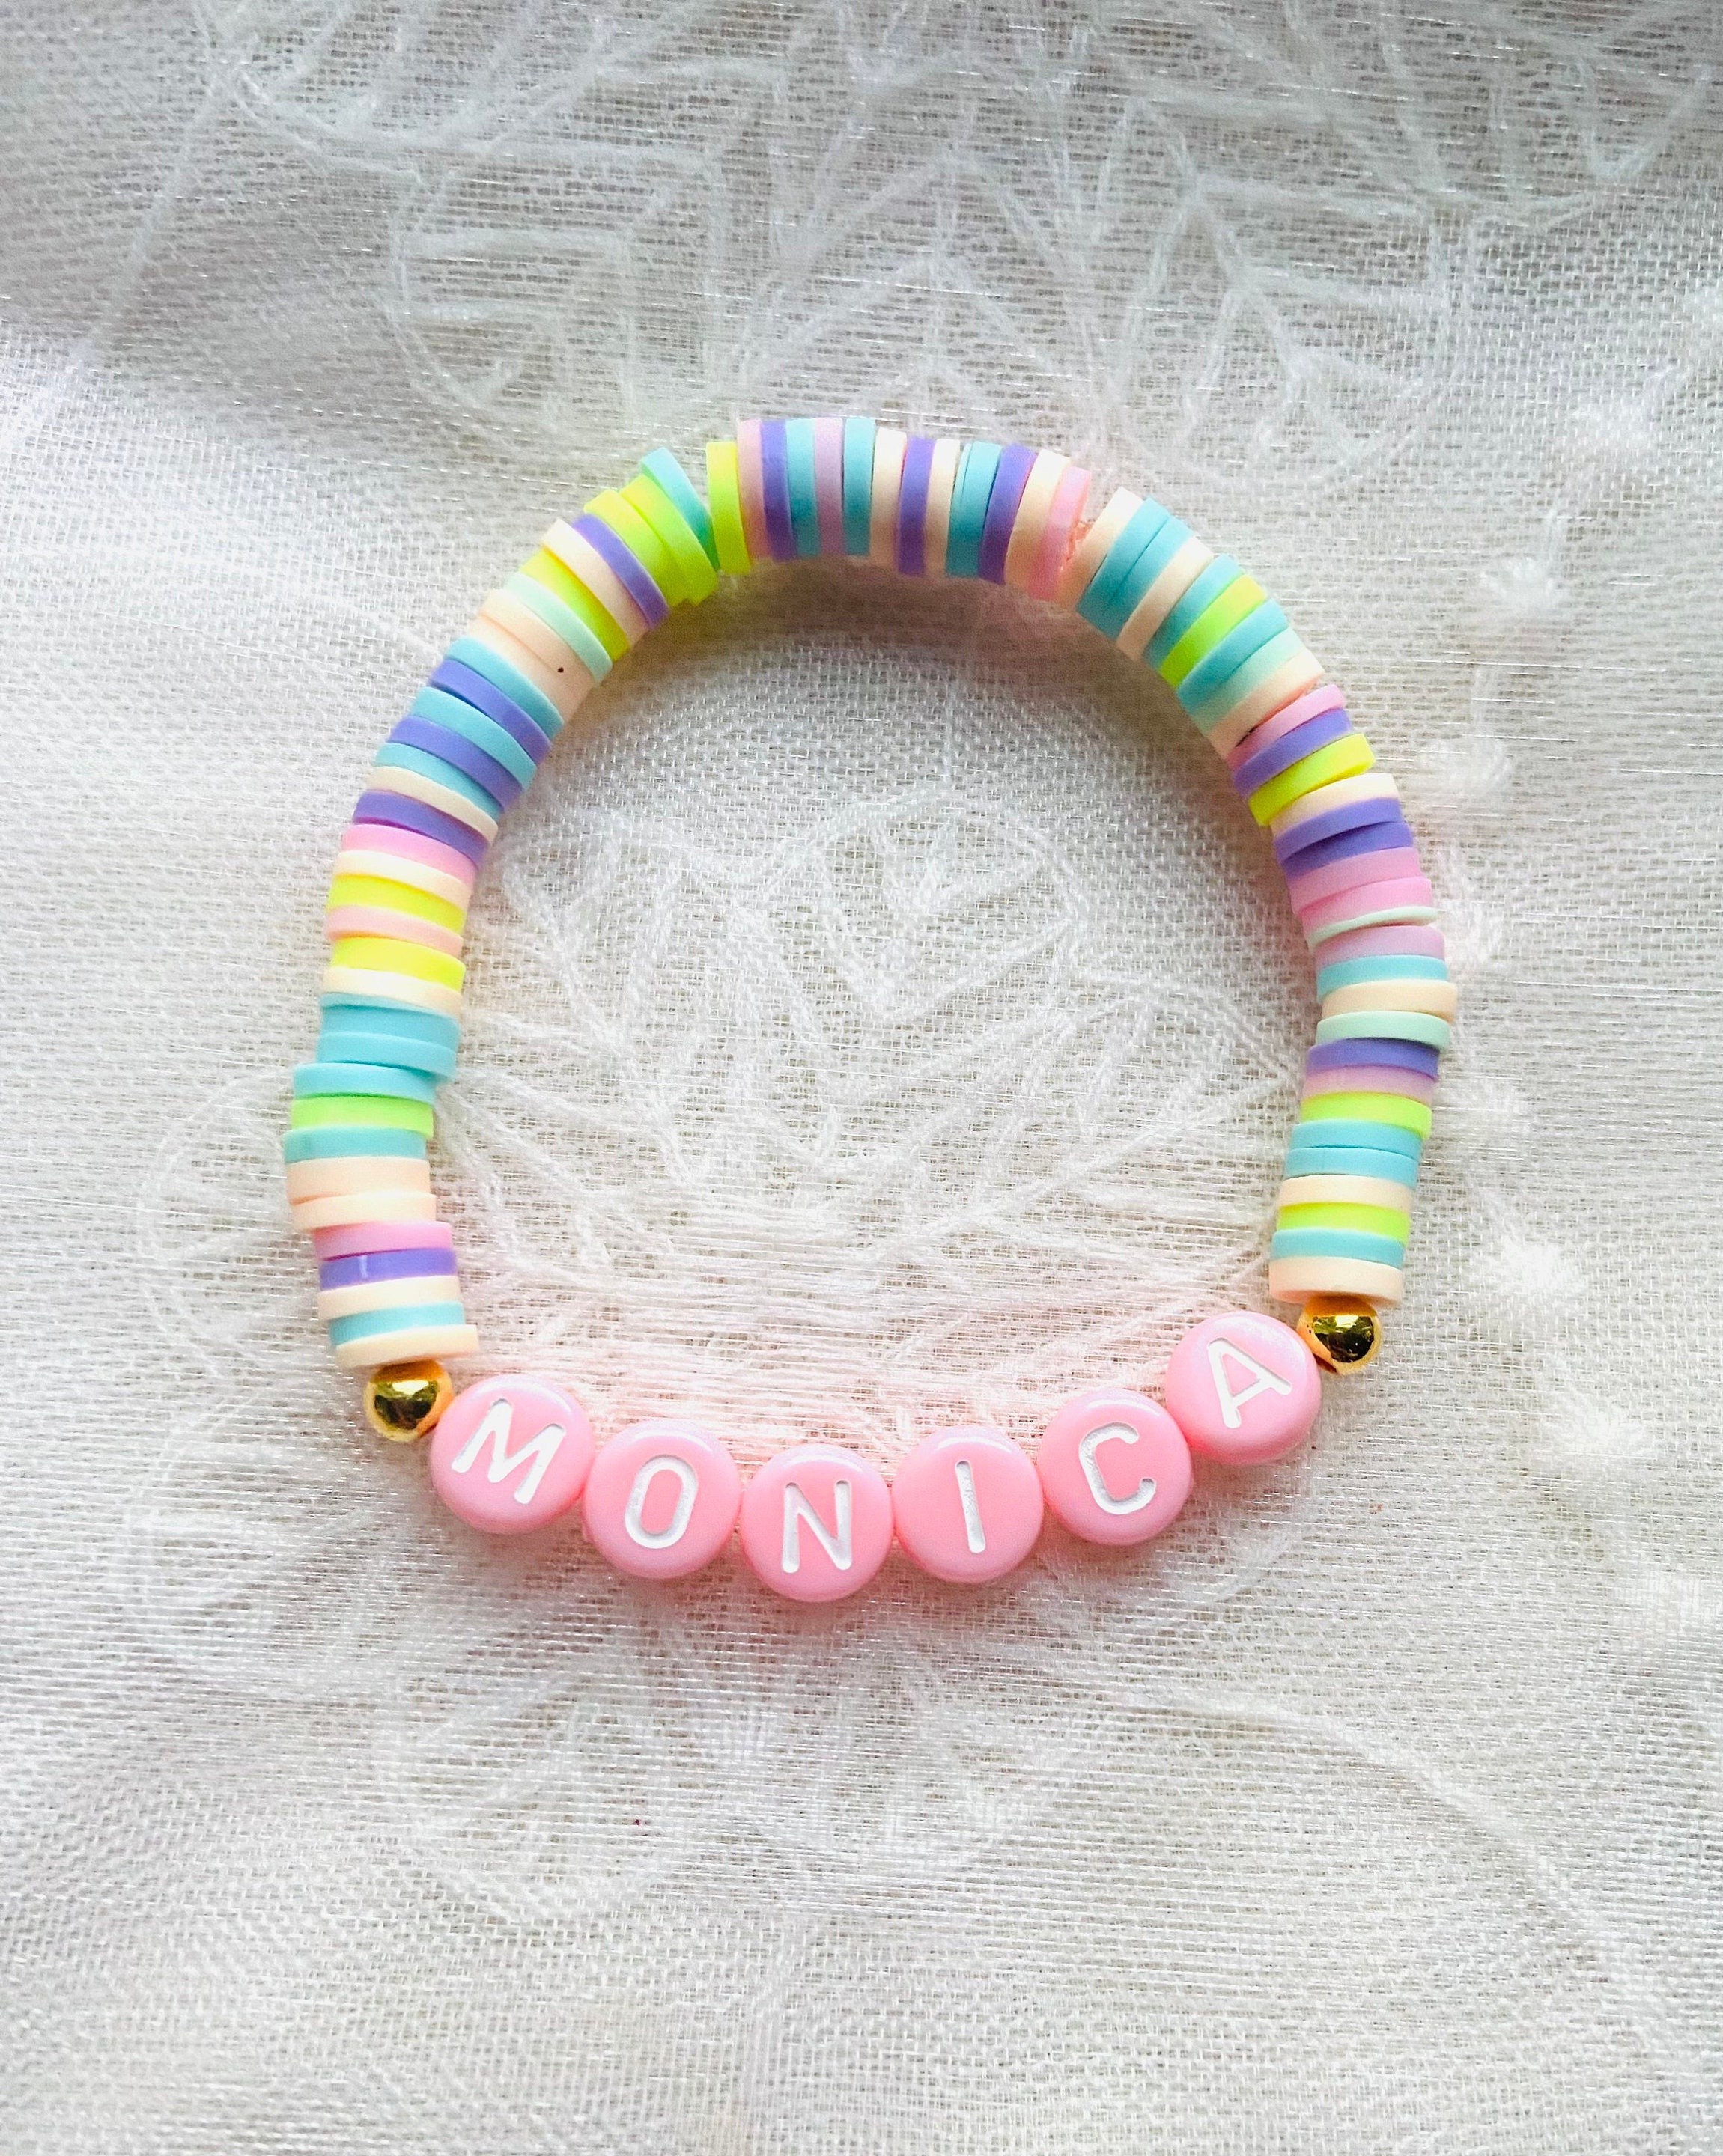 polymer clay beads for bracelets making| Alibaba.com